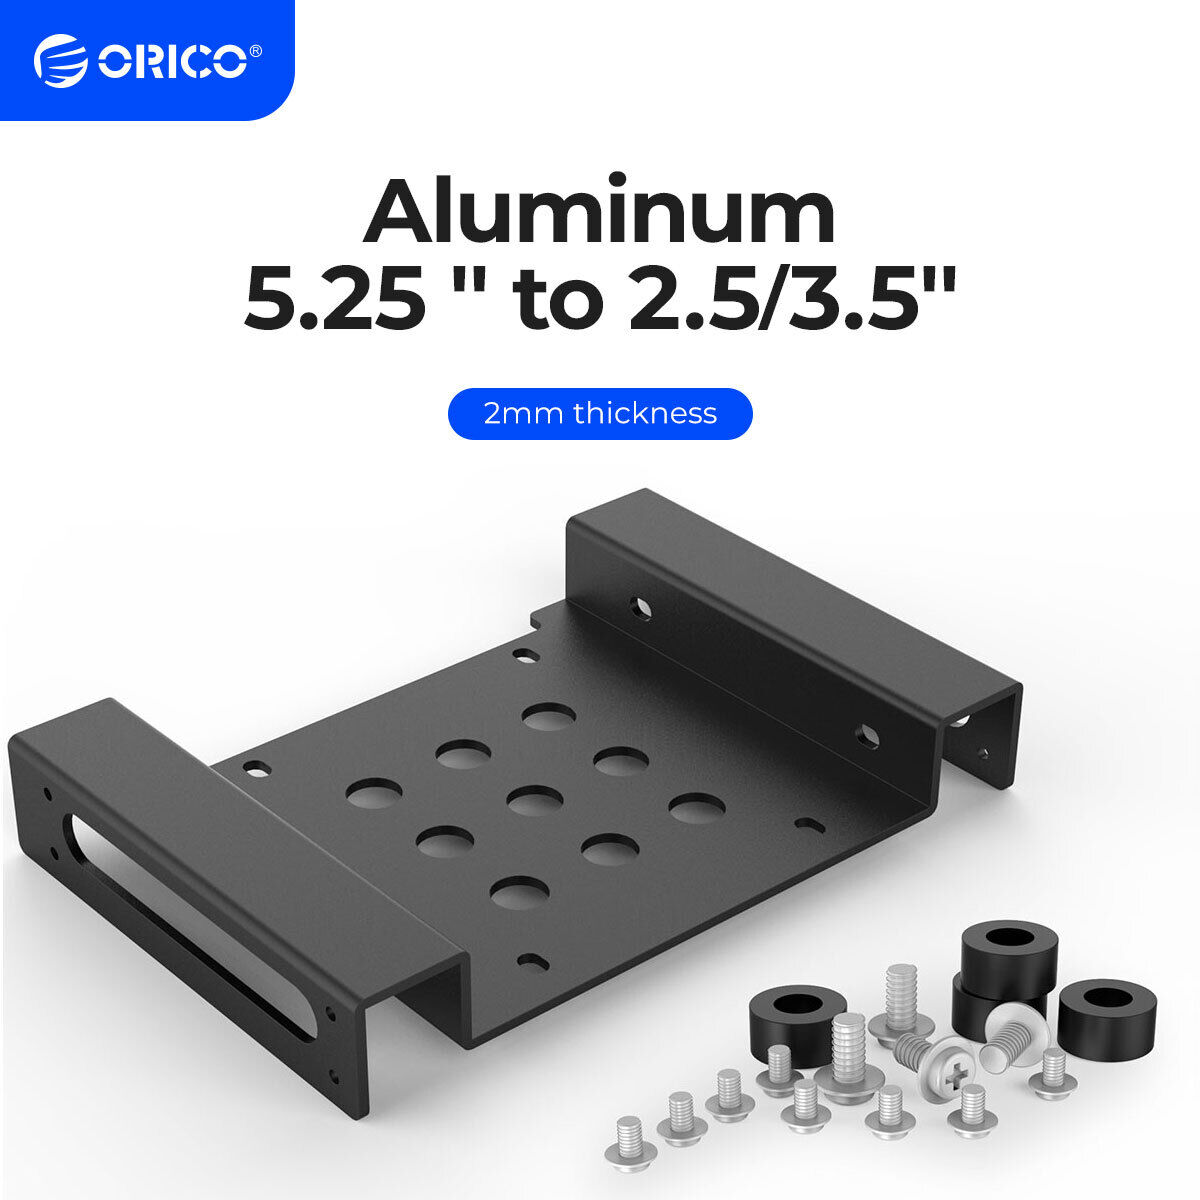 ORICO Aluminum 5.25 to 2.5/3.5 Internal Hard Disk Drive Mounting Kit with Screws